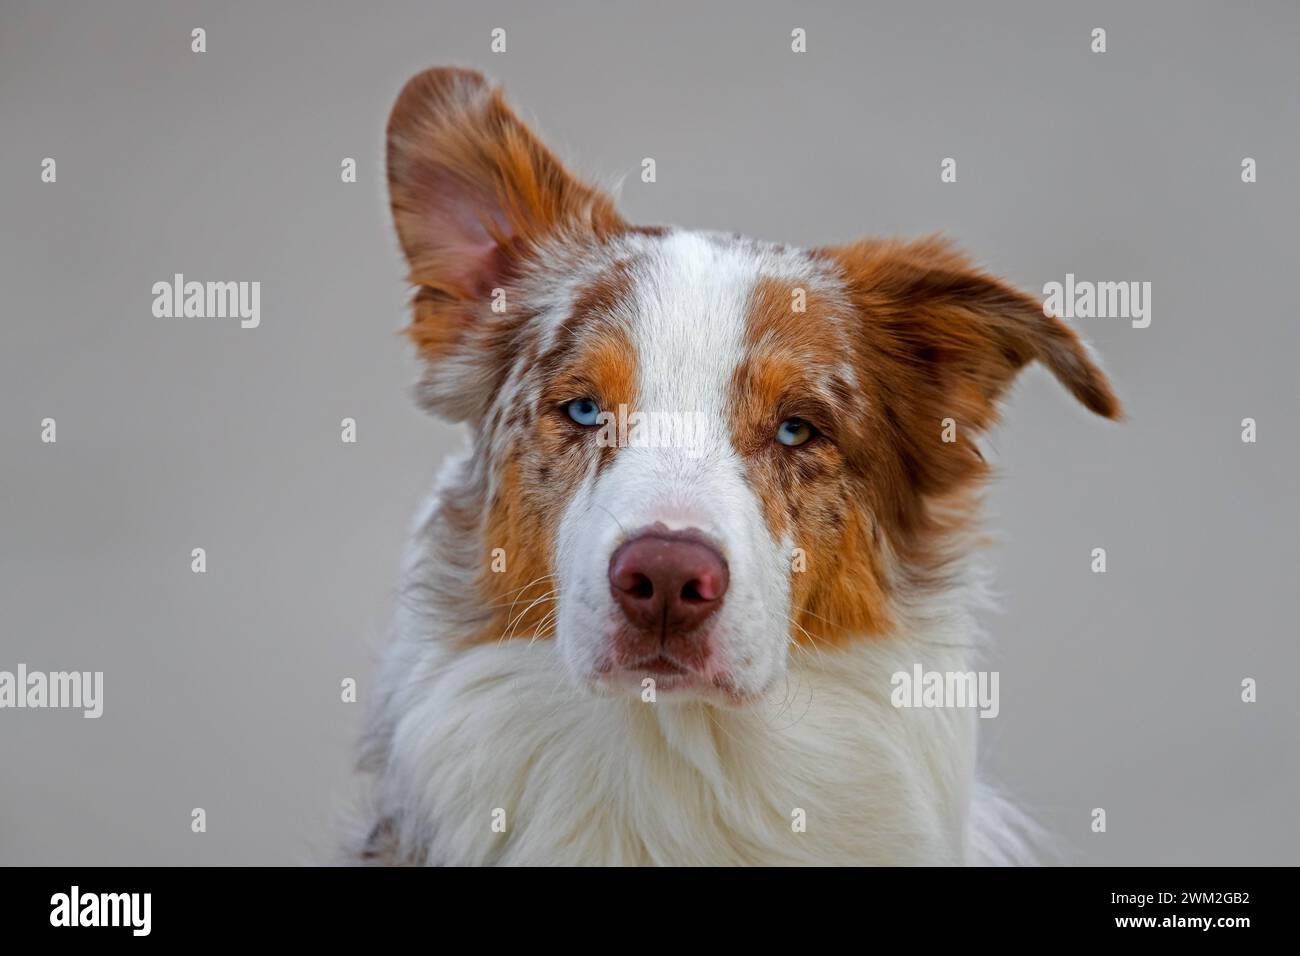 Australian Shepherd / Aussie, breed of herding dog from the United States, close-up portrait Stock Photo